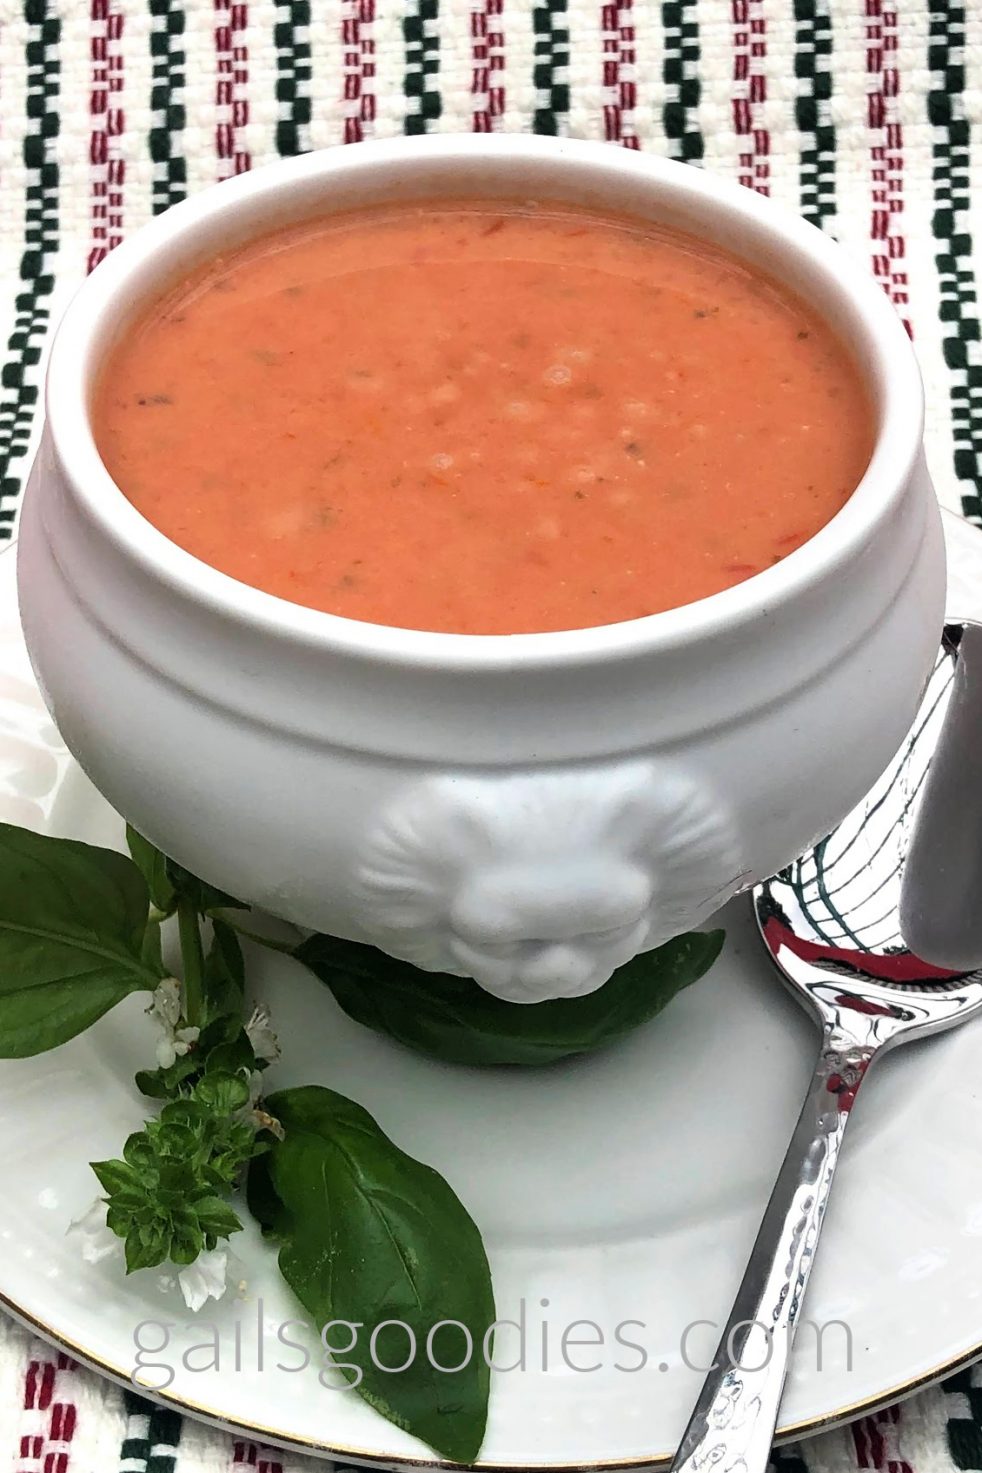 A white footed bowl filled with tomato basil soup sits on a white plate with a gold rim. There is a spoon on the plate to the right of the bowl and a sprig of basil on the plate to the left of the bowl. The front of the bowl is decorated with a lion's head. The tomato basil soup is a medium orange red and is speckled with dark green flecks. The view is from about 45 degrees above the bowl.